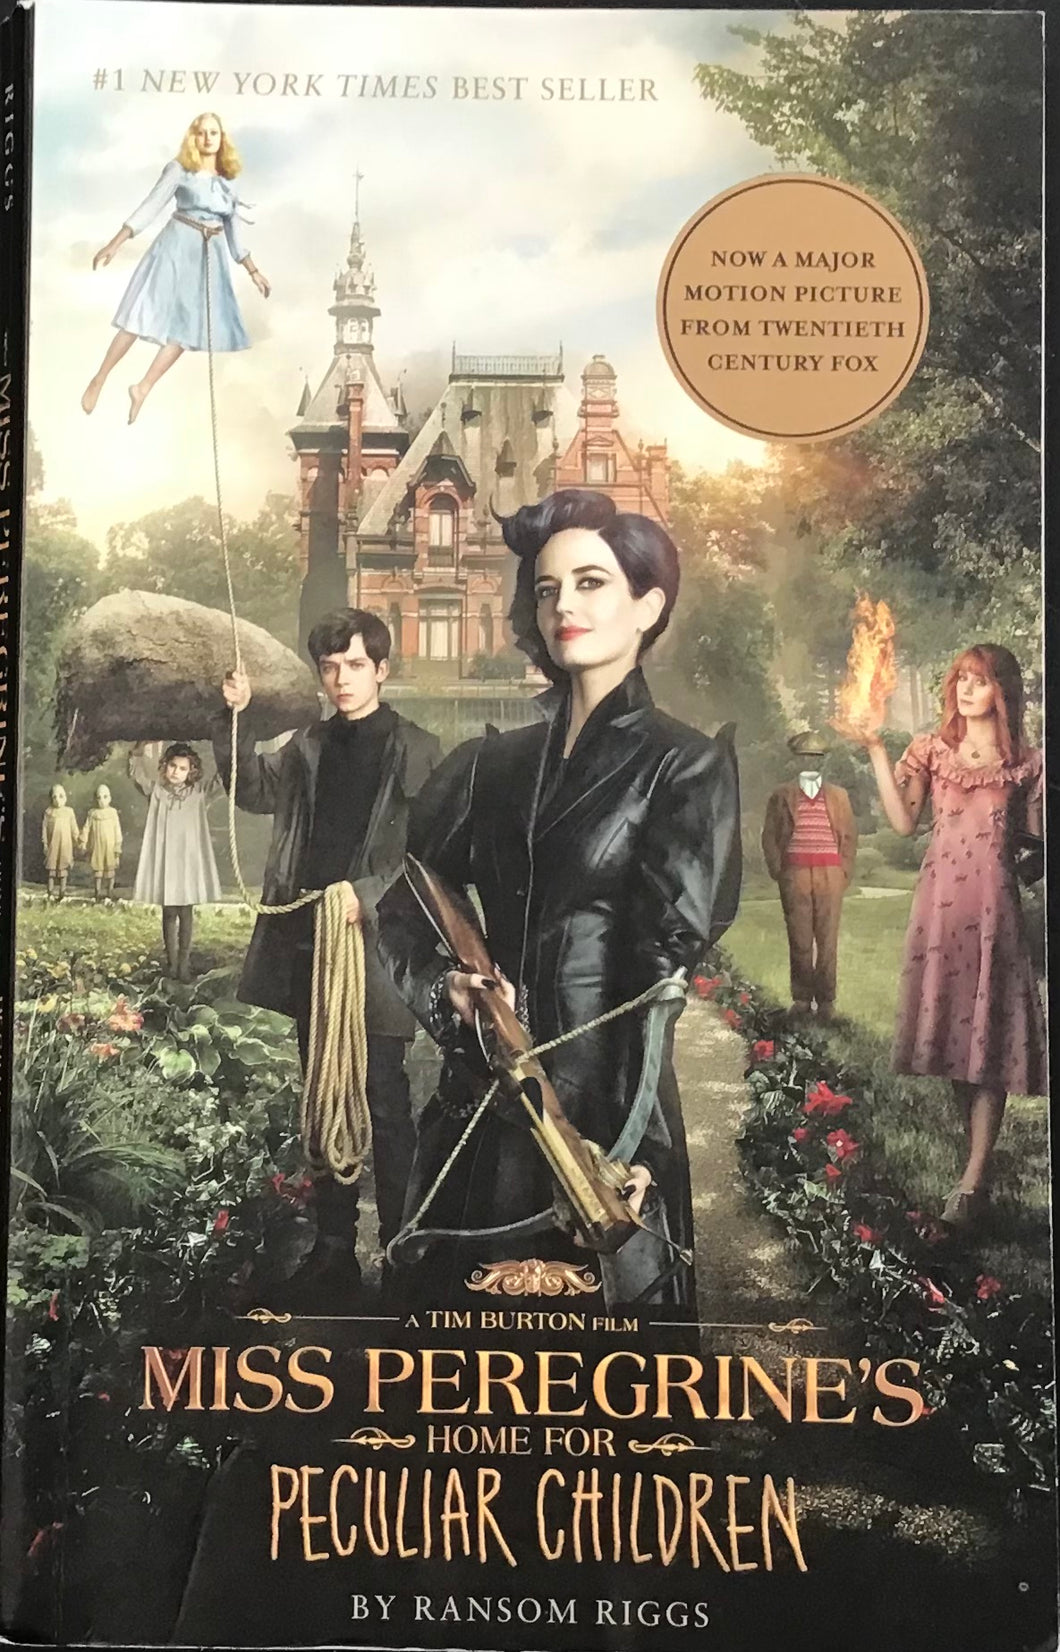 Miss Peregrine's Home For Peculiar Children, Ransom Riggs